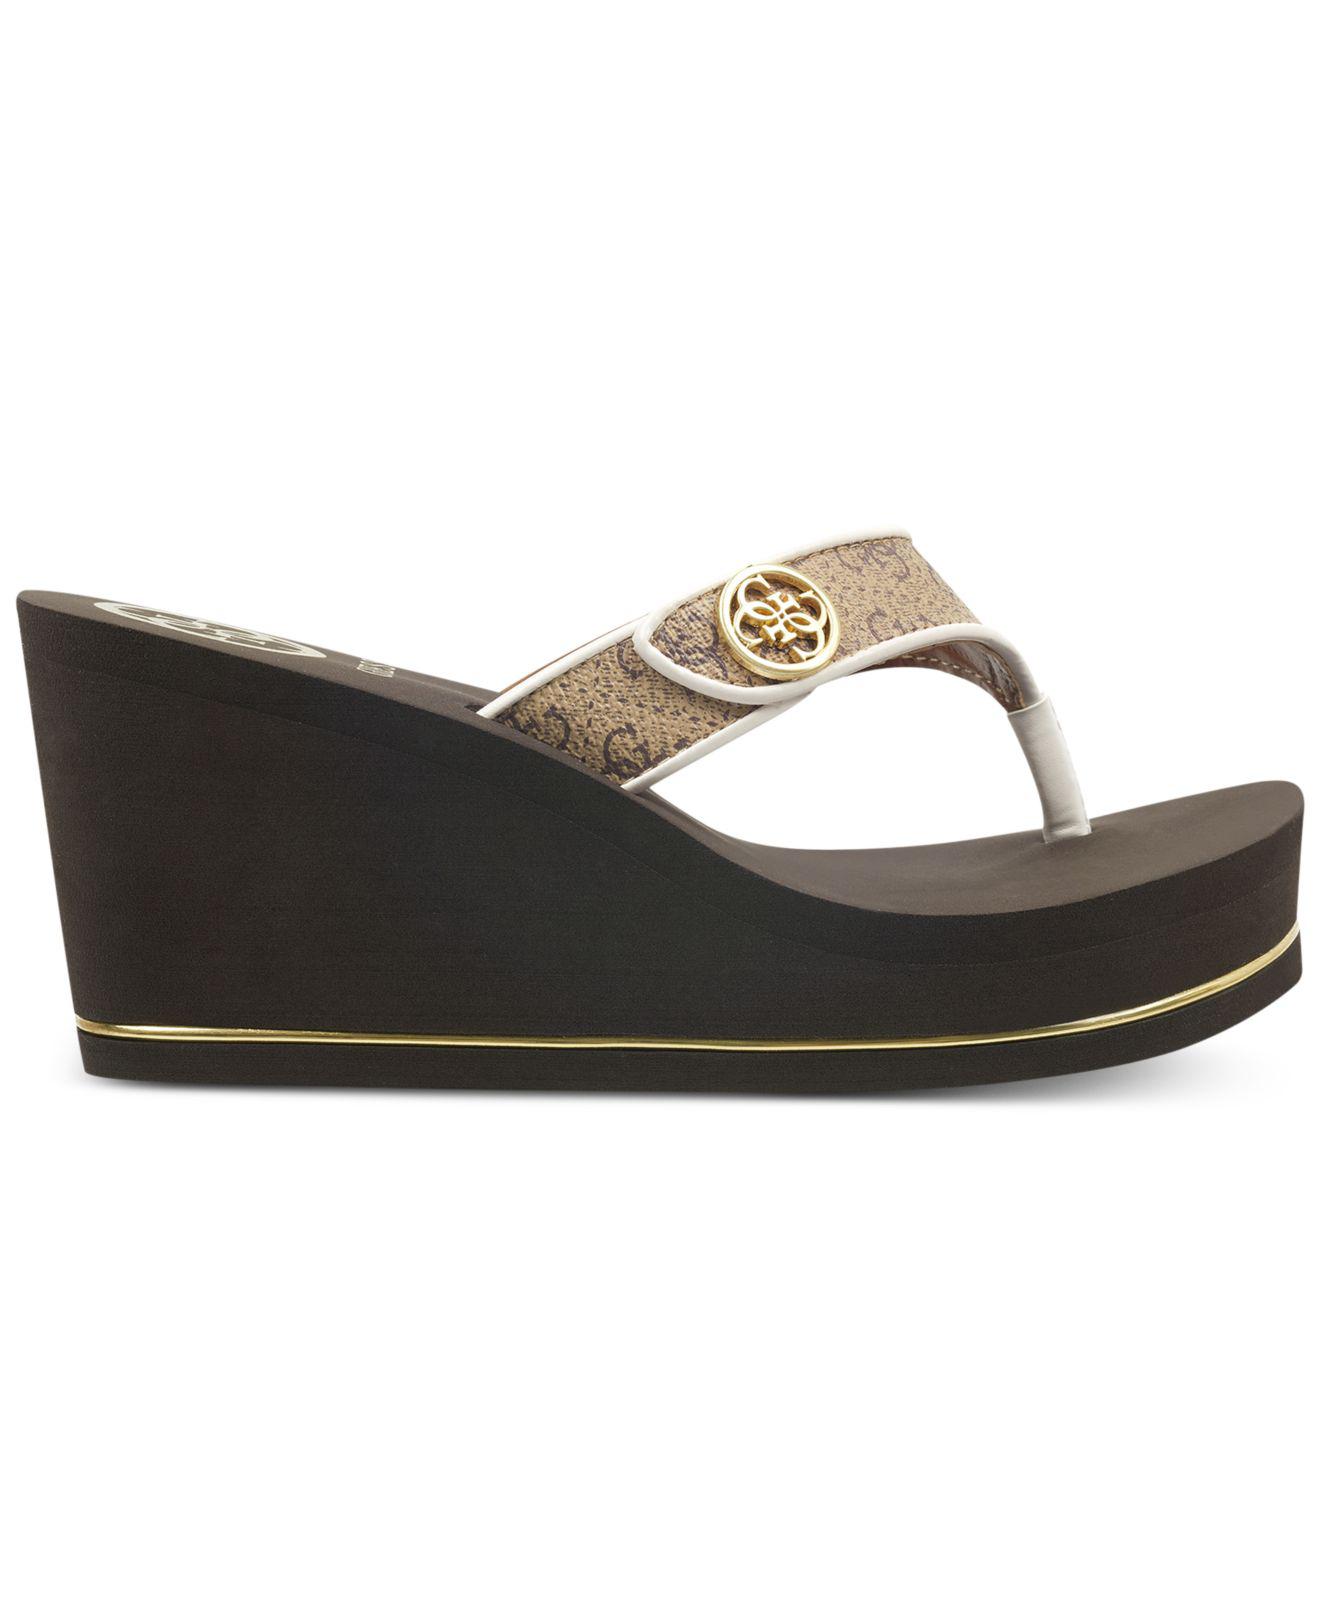 Guess Sarraly Eva Logo Wedge Sandals in Brown - Lyst